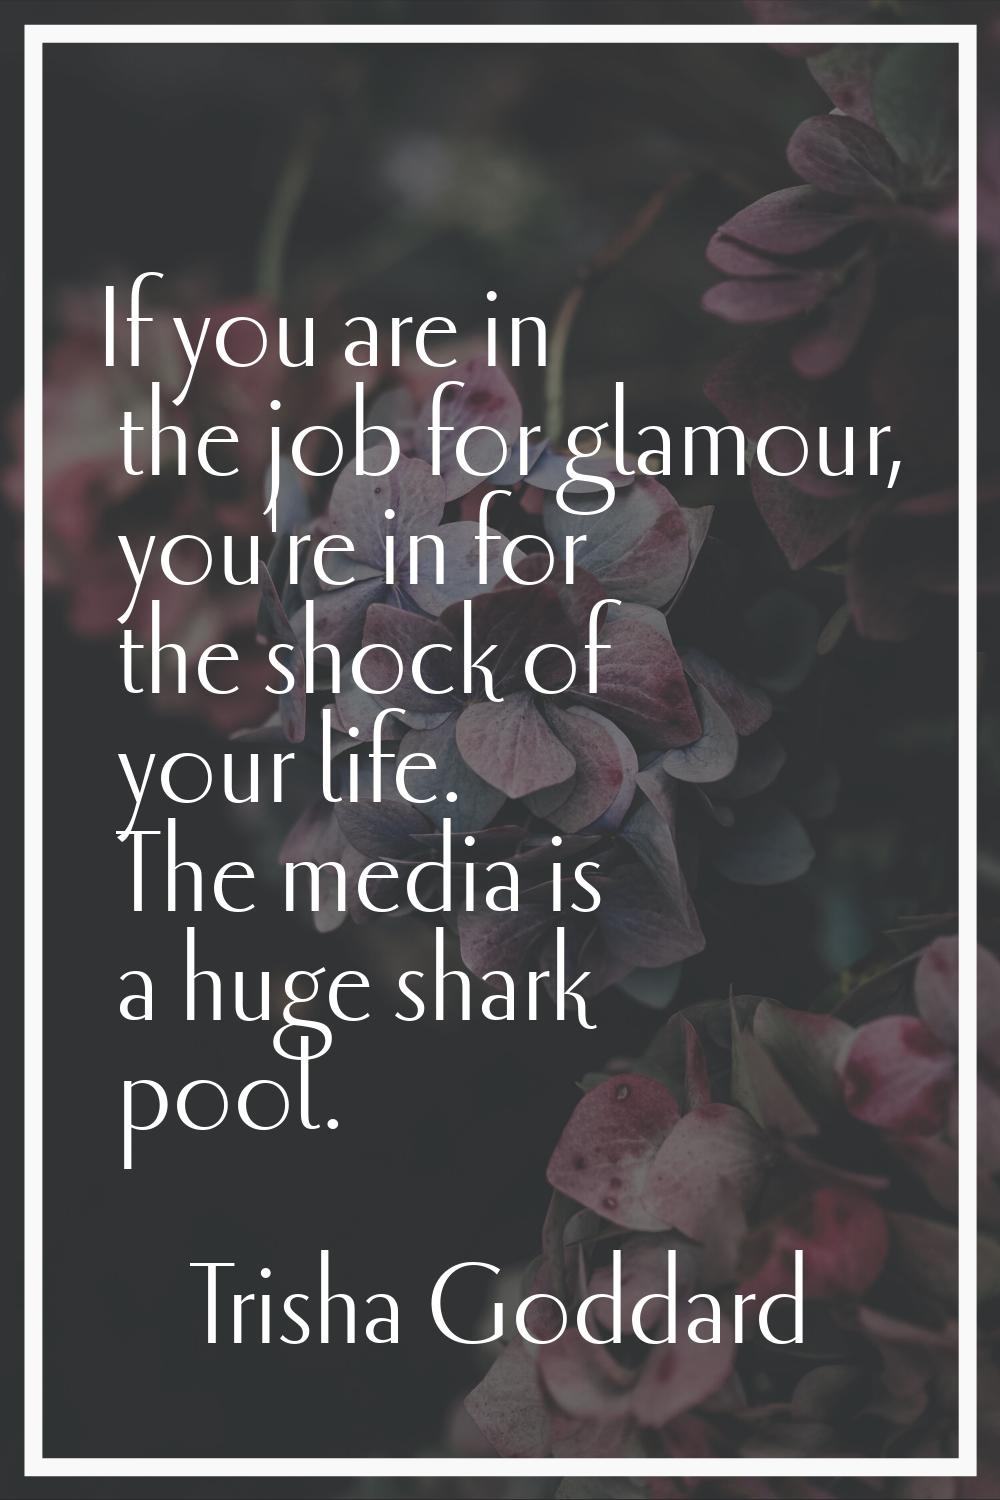 If you are in the job for glamour, you're in for the shock of your life. The media is a huge shark 